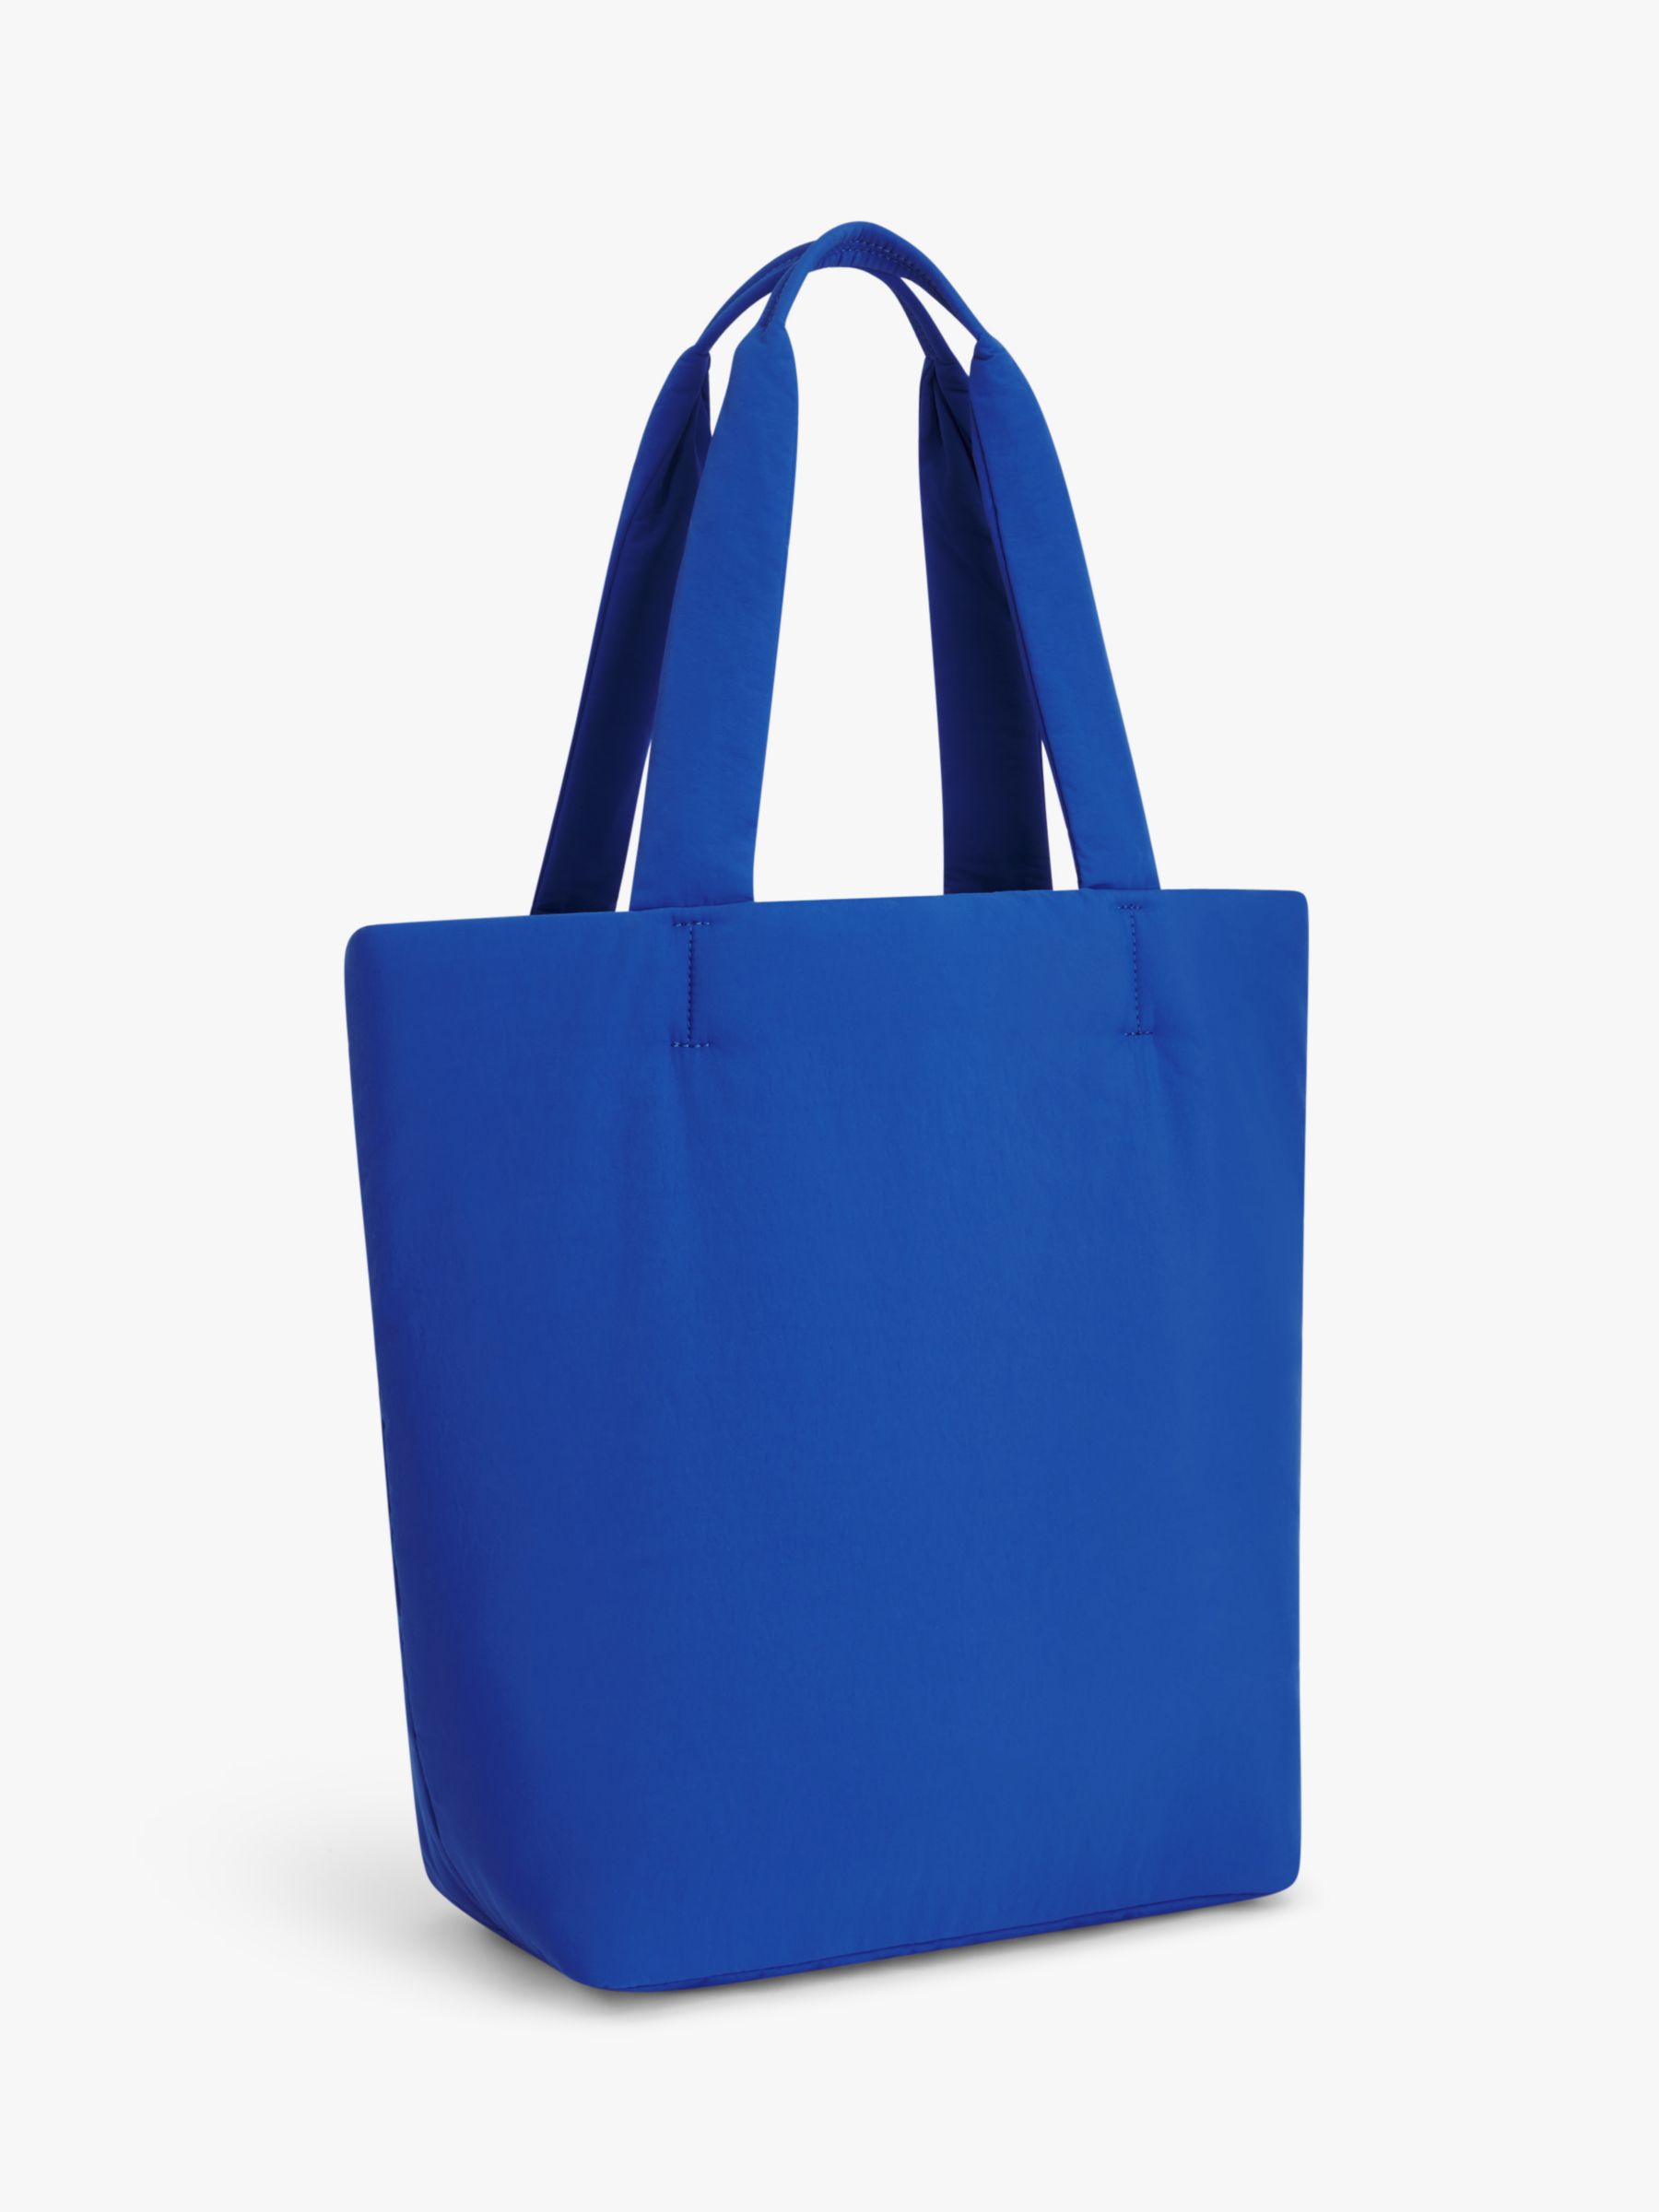 John Lewis ANYDAY Puffy North South Tote Bag, Blue at John Lewis & Partners